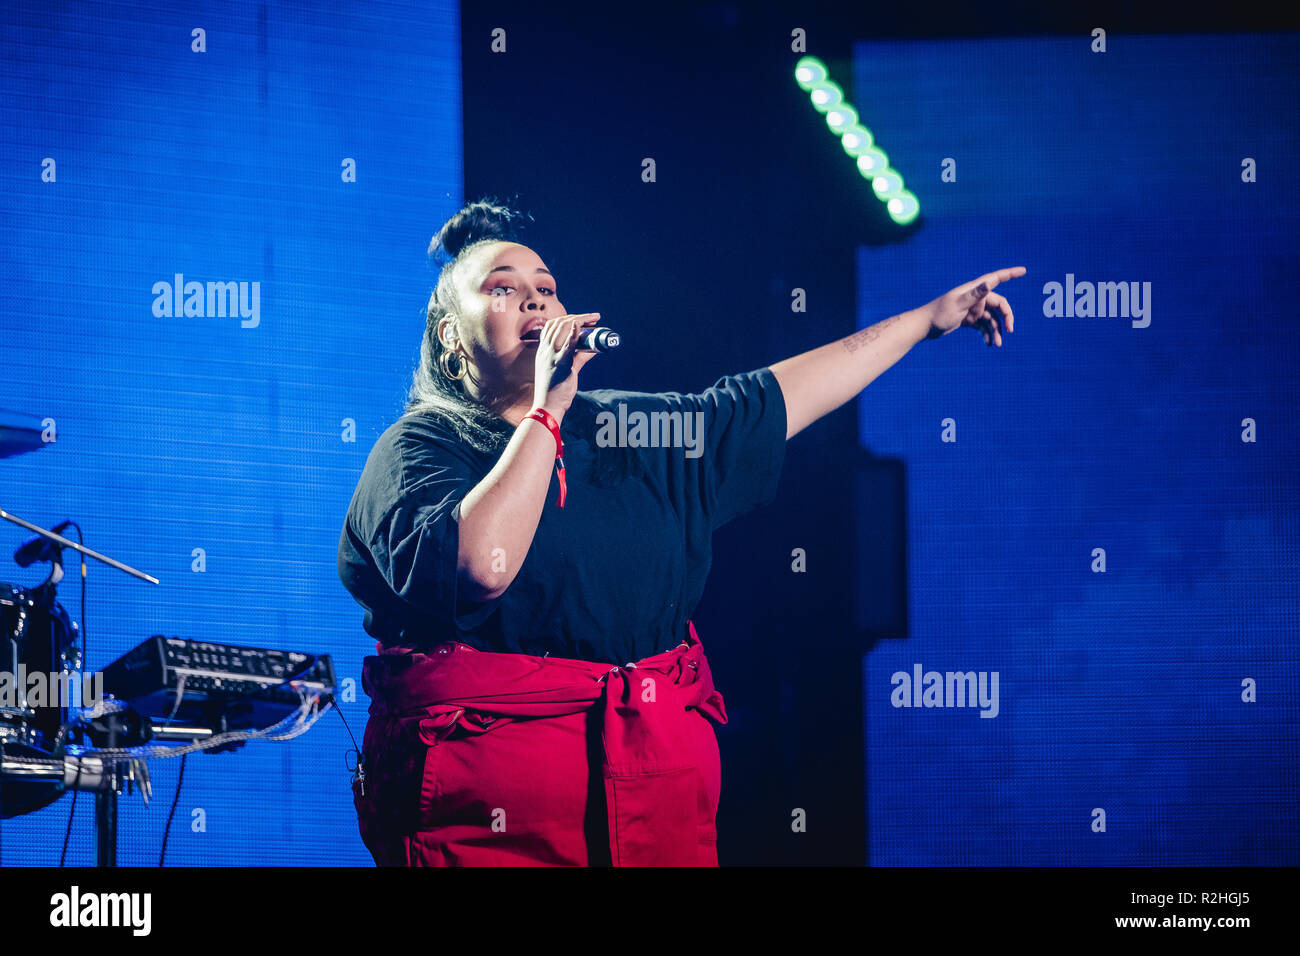 Switzerland, Zürich - November 16, 2018. The English electronic music group Clean Bandit performs a live concert during the Energy Star Night 2018 in Hallenstadion in Zürich. Here singer Yasmin Green is seen live on stage. (Photo credit: Gonzales Photo - Tilman Jentzsch). Stock Photo